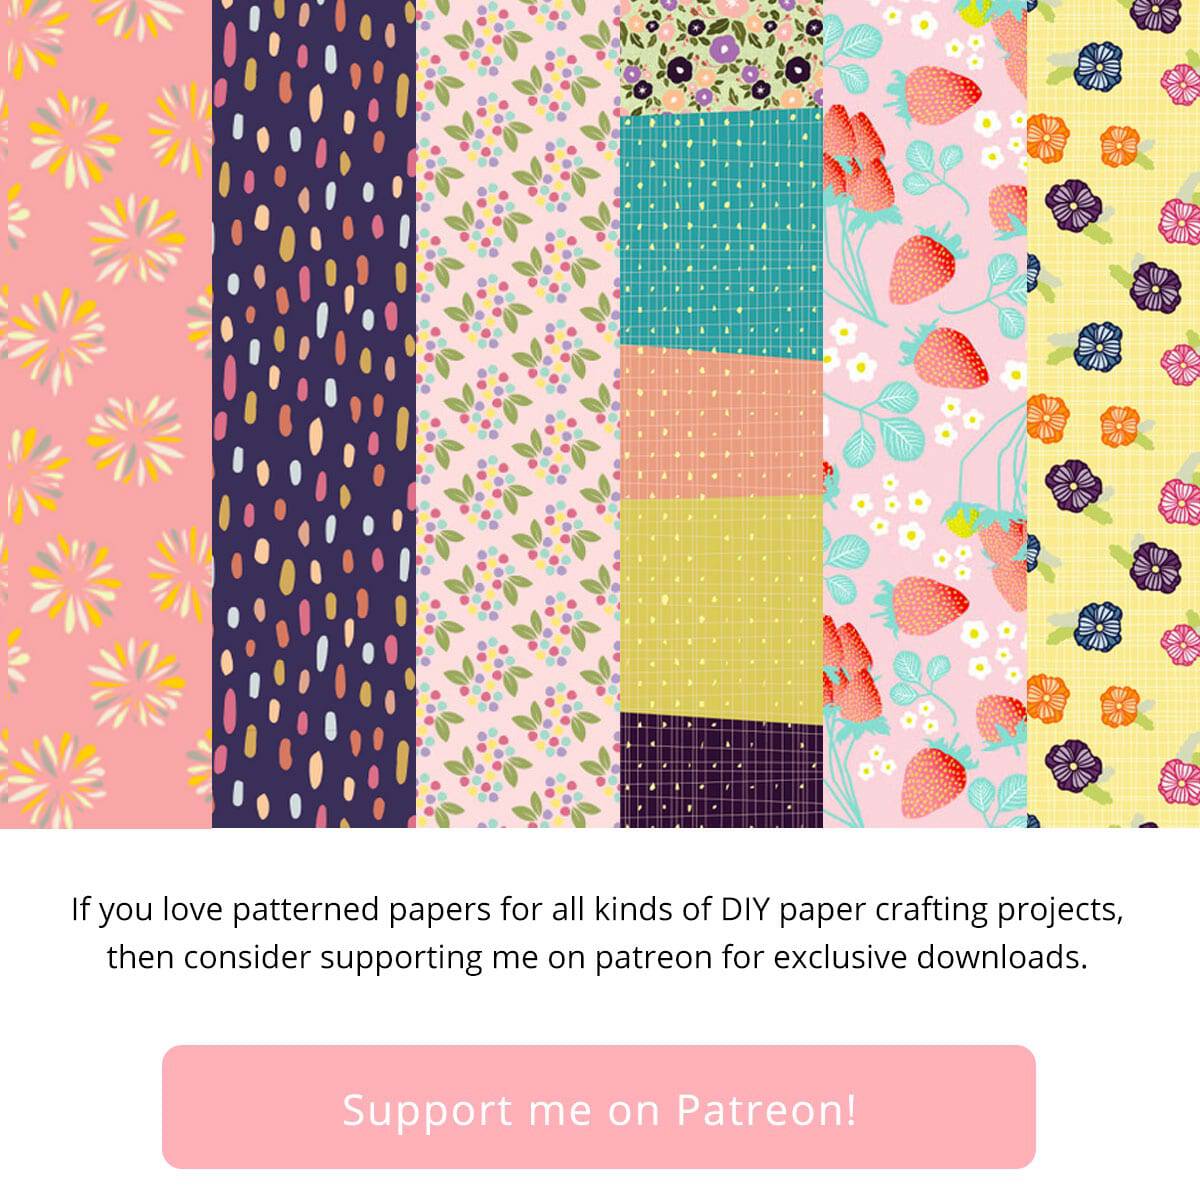 If you love patterened papers for all kinds of DIY paper crafting projects, then consider supporting me on patreon for exclusive downloads.